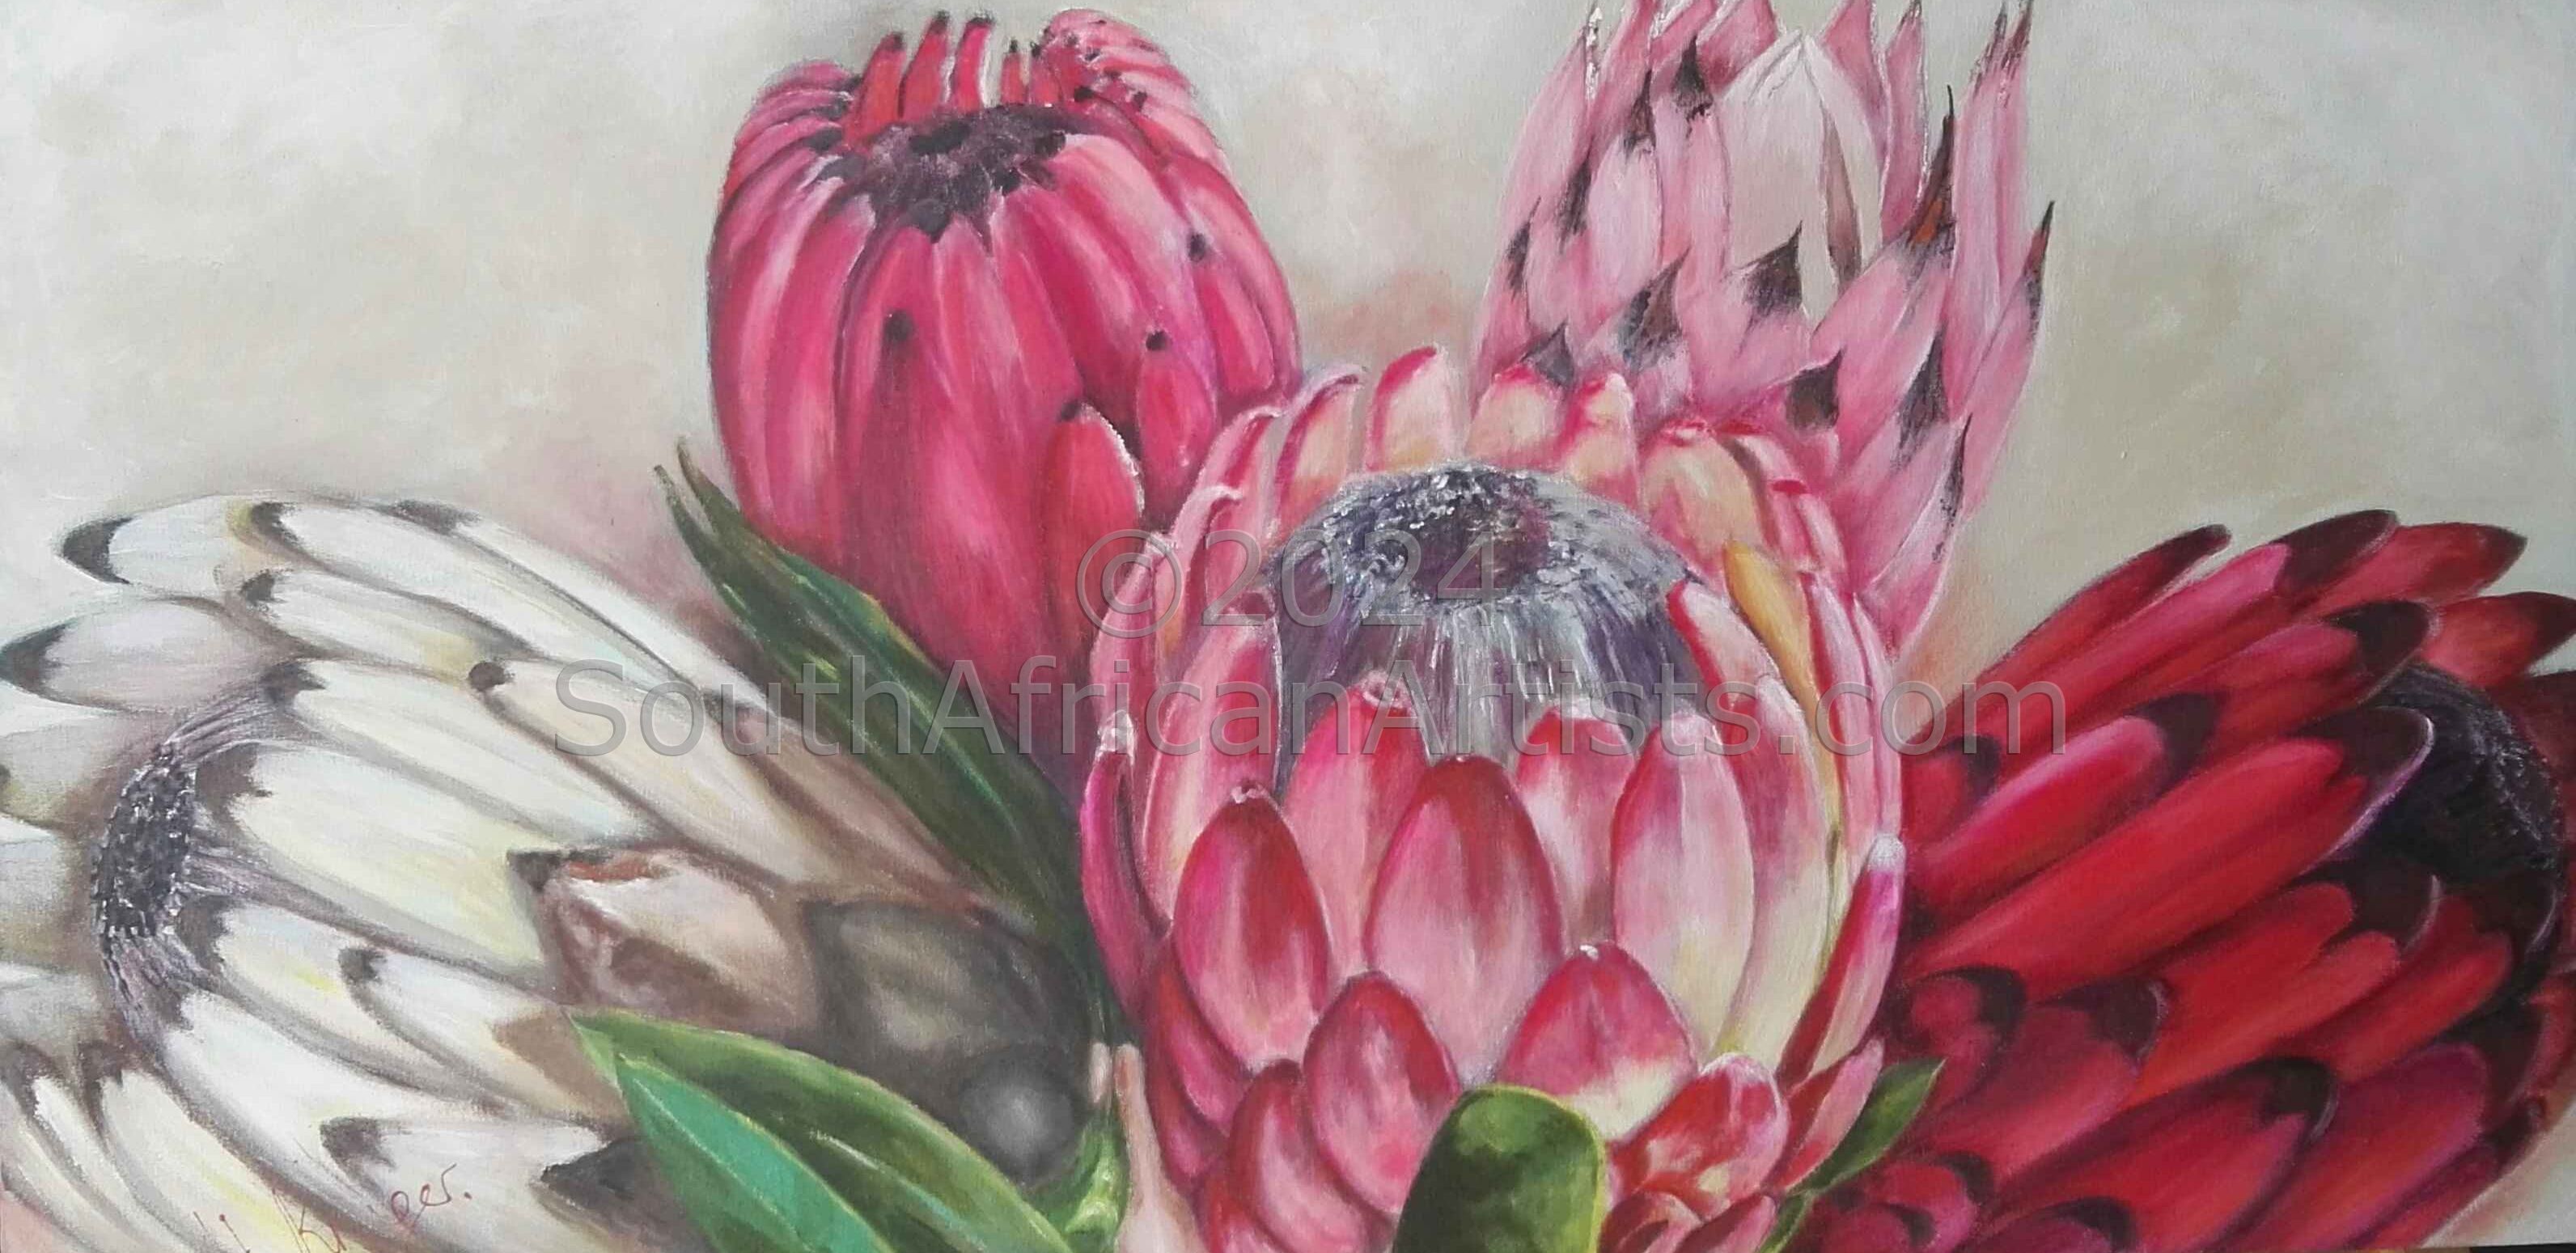 Proteas in bloom